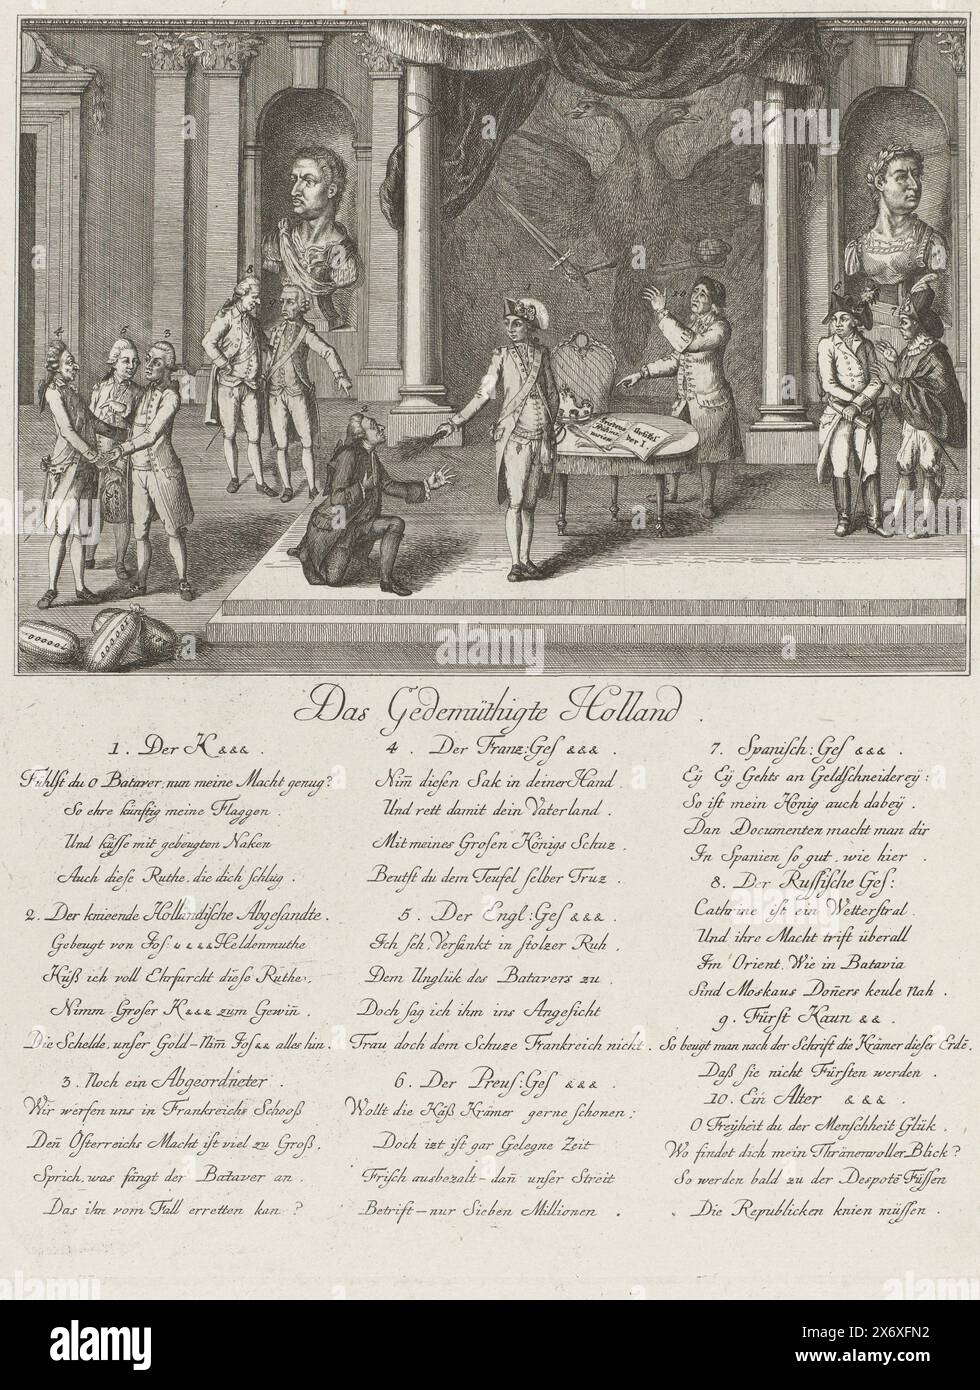 Cartoon on the Treaty of Fontainebleau, 1785, Das Gedemüthigte Holland (title on object), Cartoon on the peace concluded in Paris that ended the Cauldron War, the disputes between the Netherlands and the Austrian Emperor Joseph II, November 8, 1785. The Netherlands paid 8.5 million guilders and accepted other humiliating conditions. In the throne room, the Dutch envoy kneels before the emperor who flogs him with a rod. Envoys from other European countries on the left and right are happy about their share in the Dutch payments. In the caption a verse of 10 stanzas in German., print, print Stock Photo